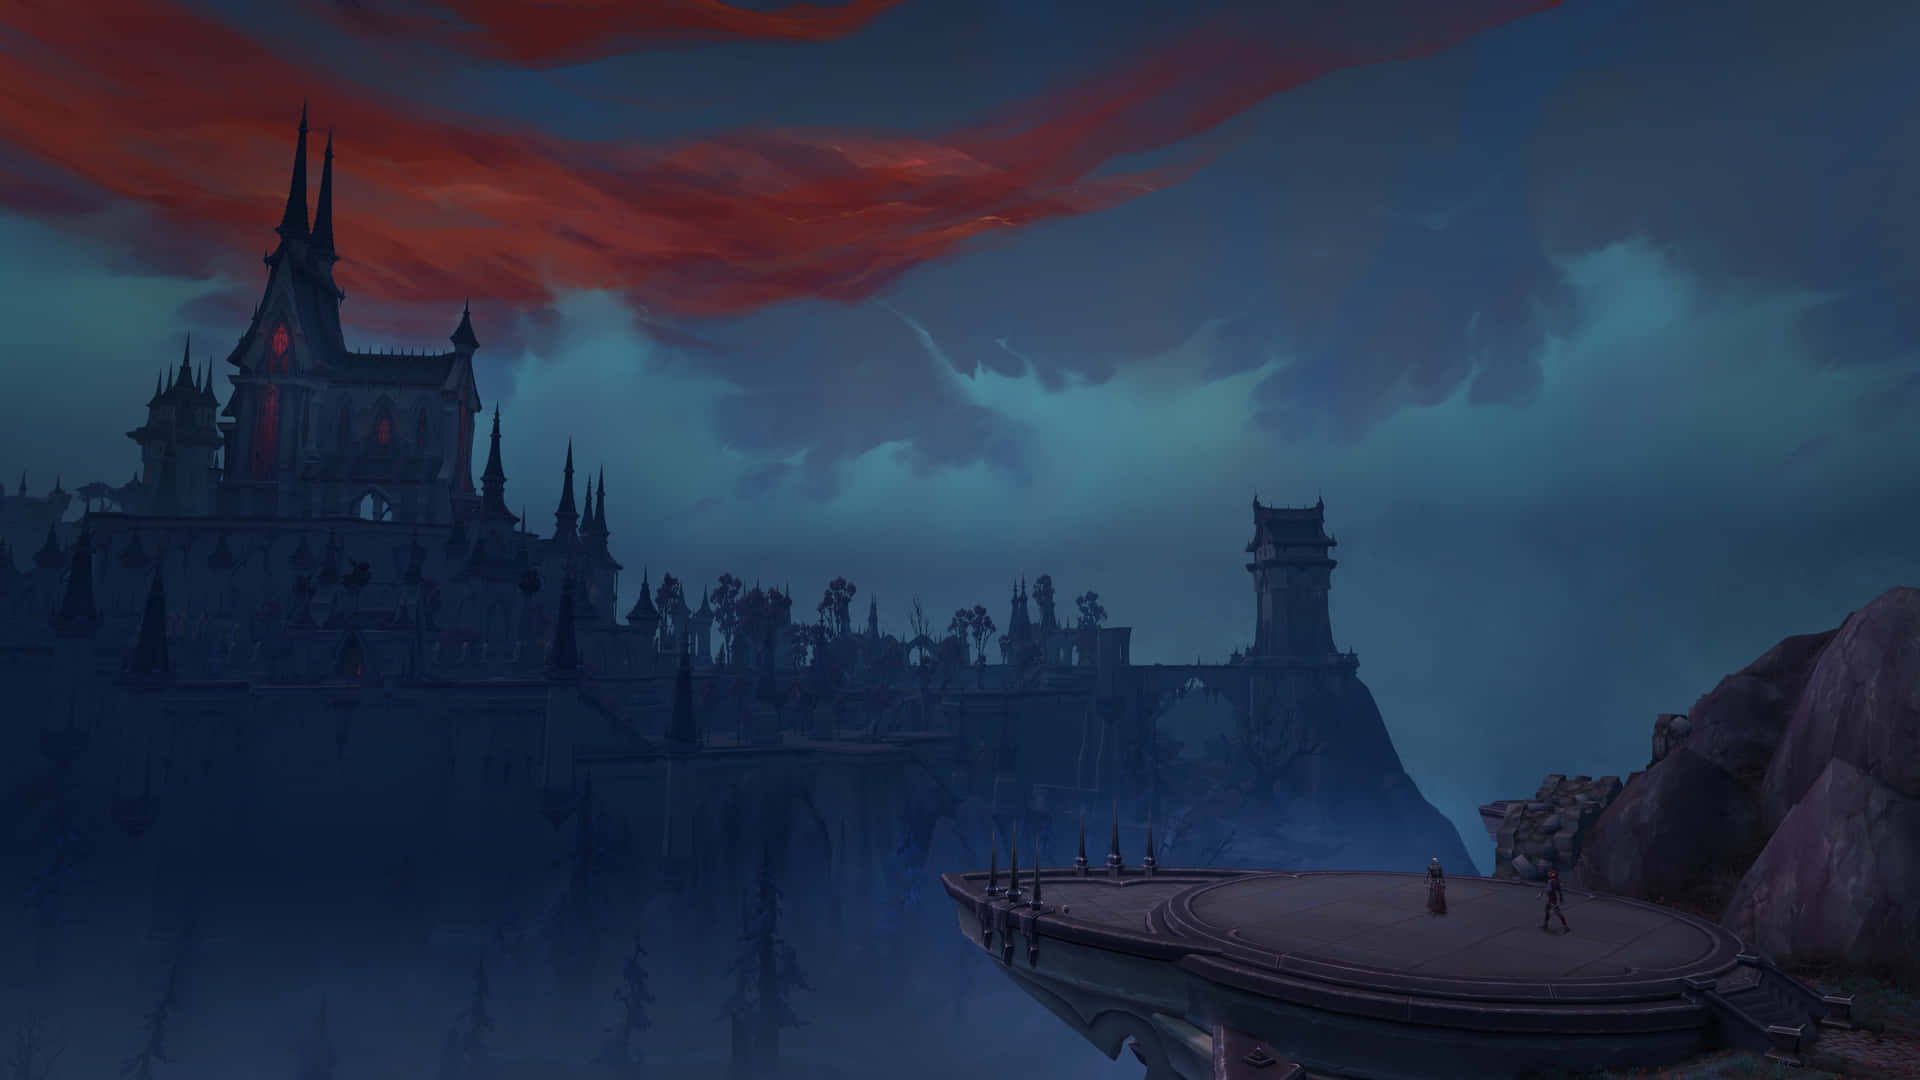 Explore the limitless possibilities of the Shadowlands in World of Warcraft. Wallpaper